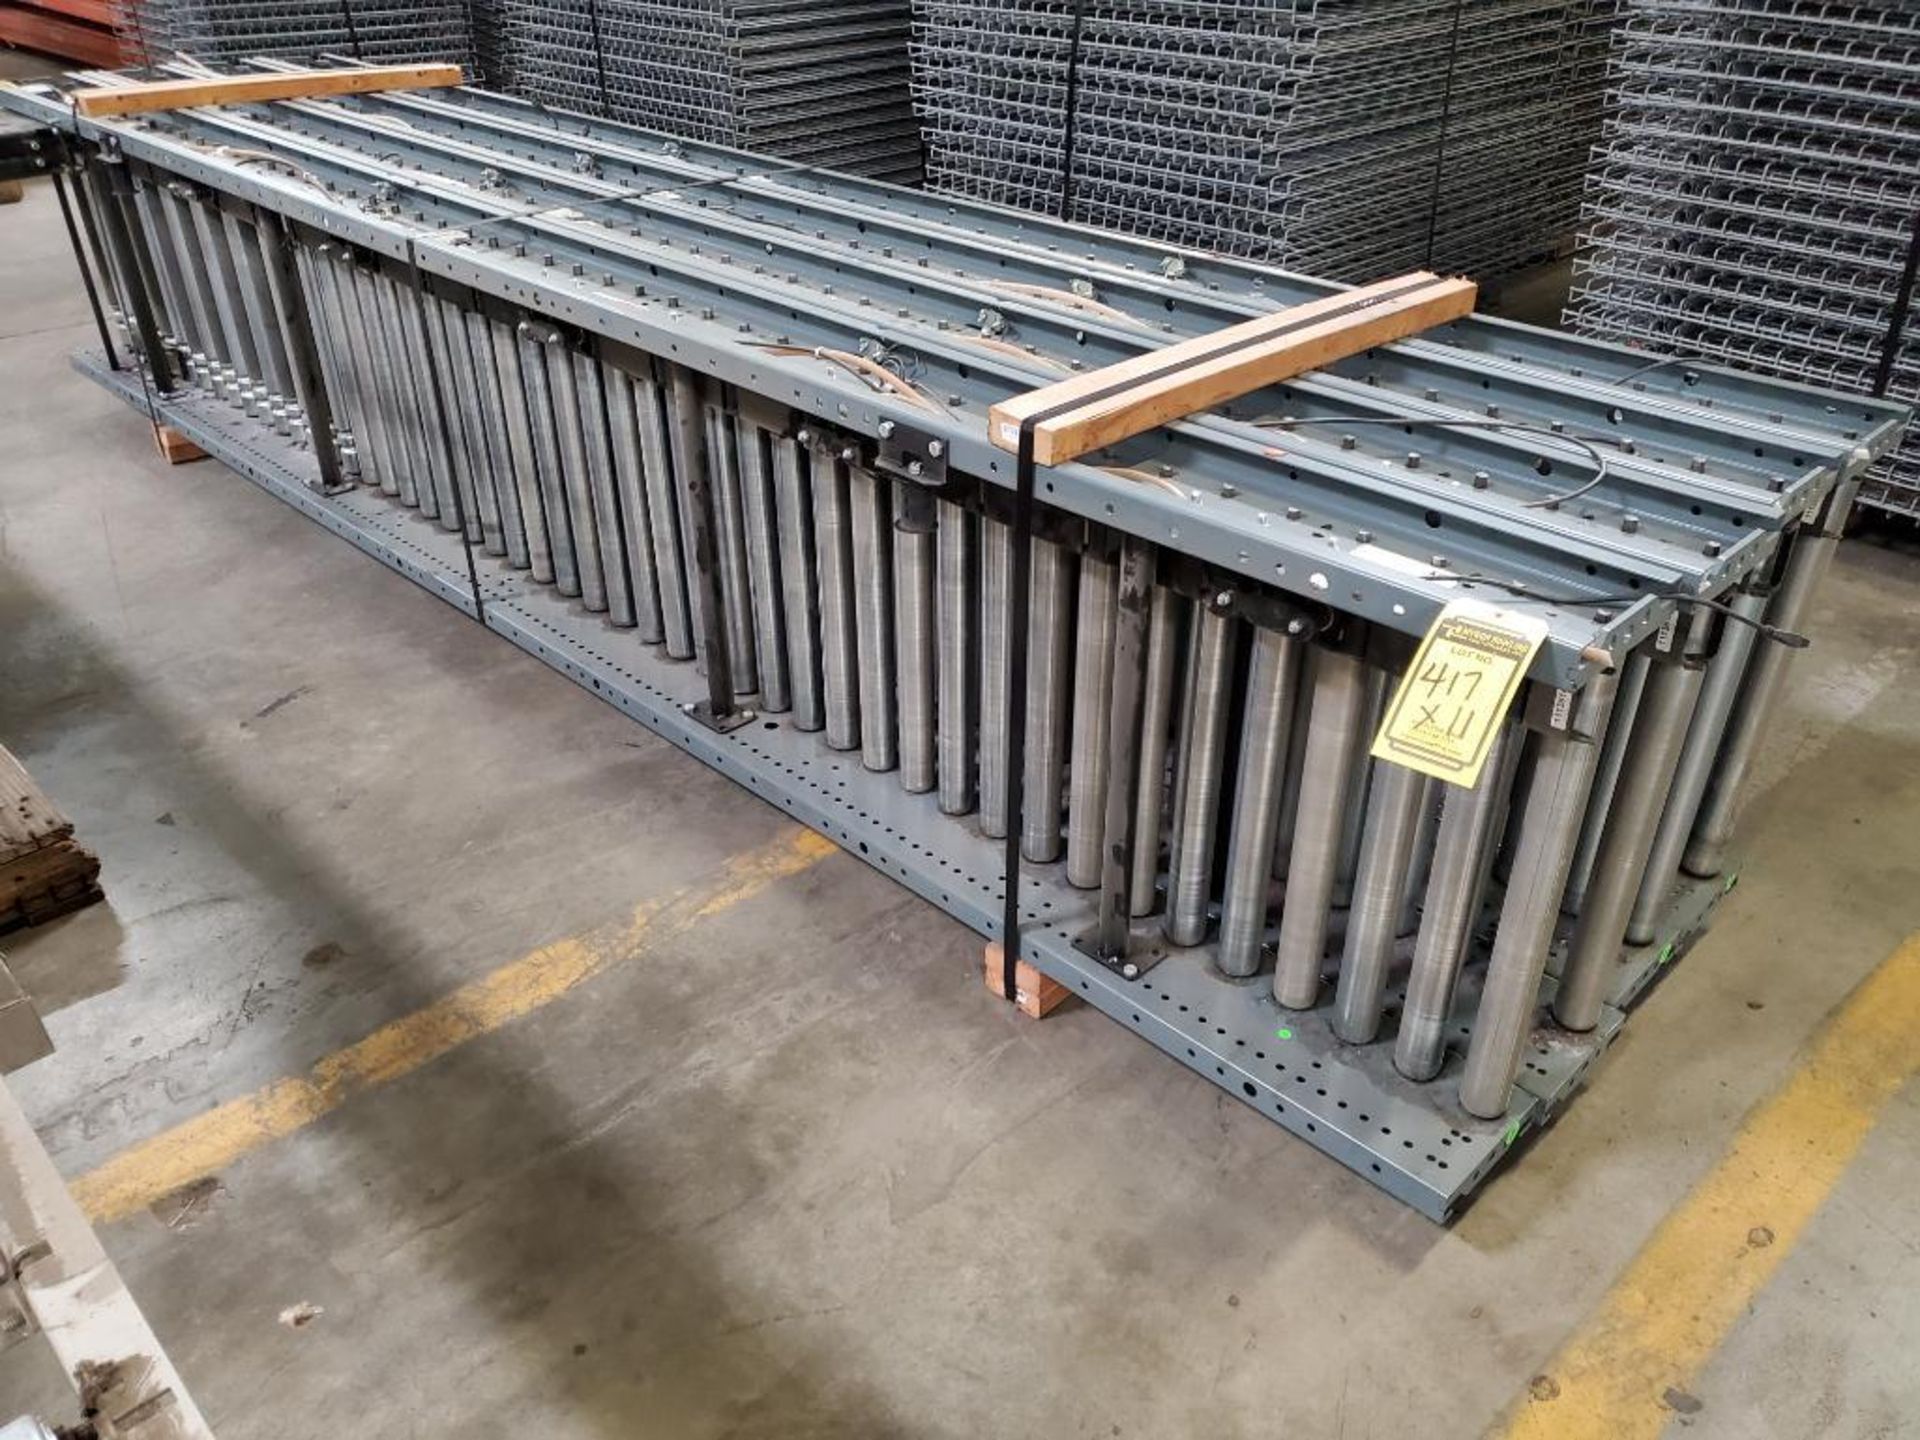 (11x) Xenorol Roller Conveyor, 21-1/2" Rollers ($50 Loading fee will be added to buyers invoice)